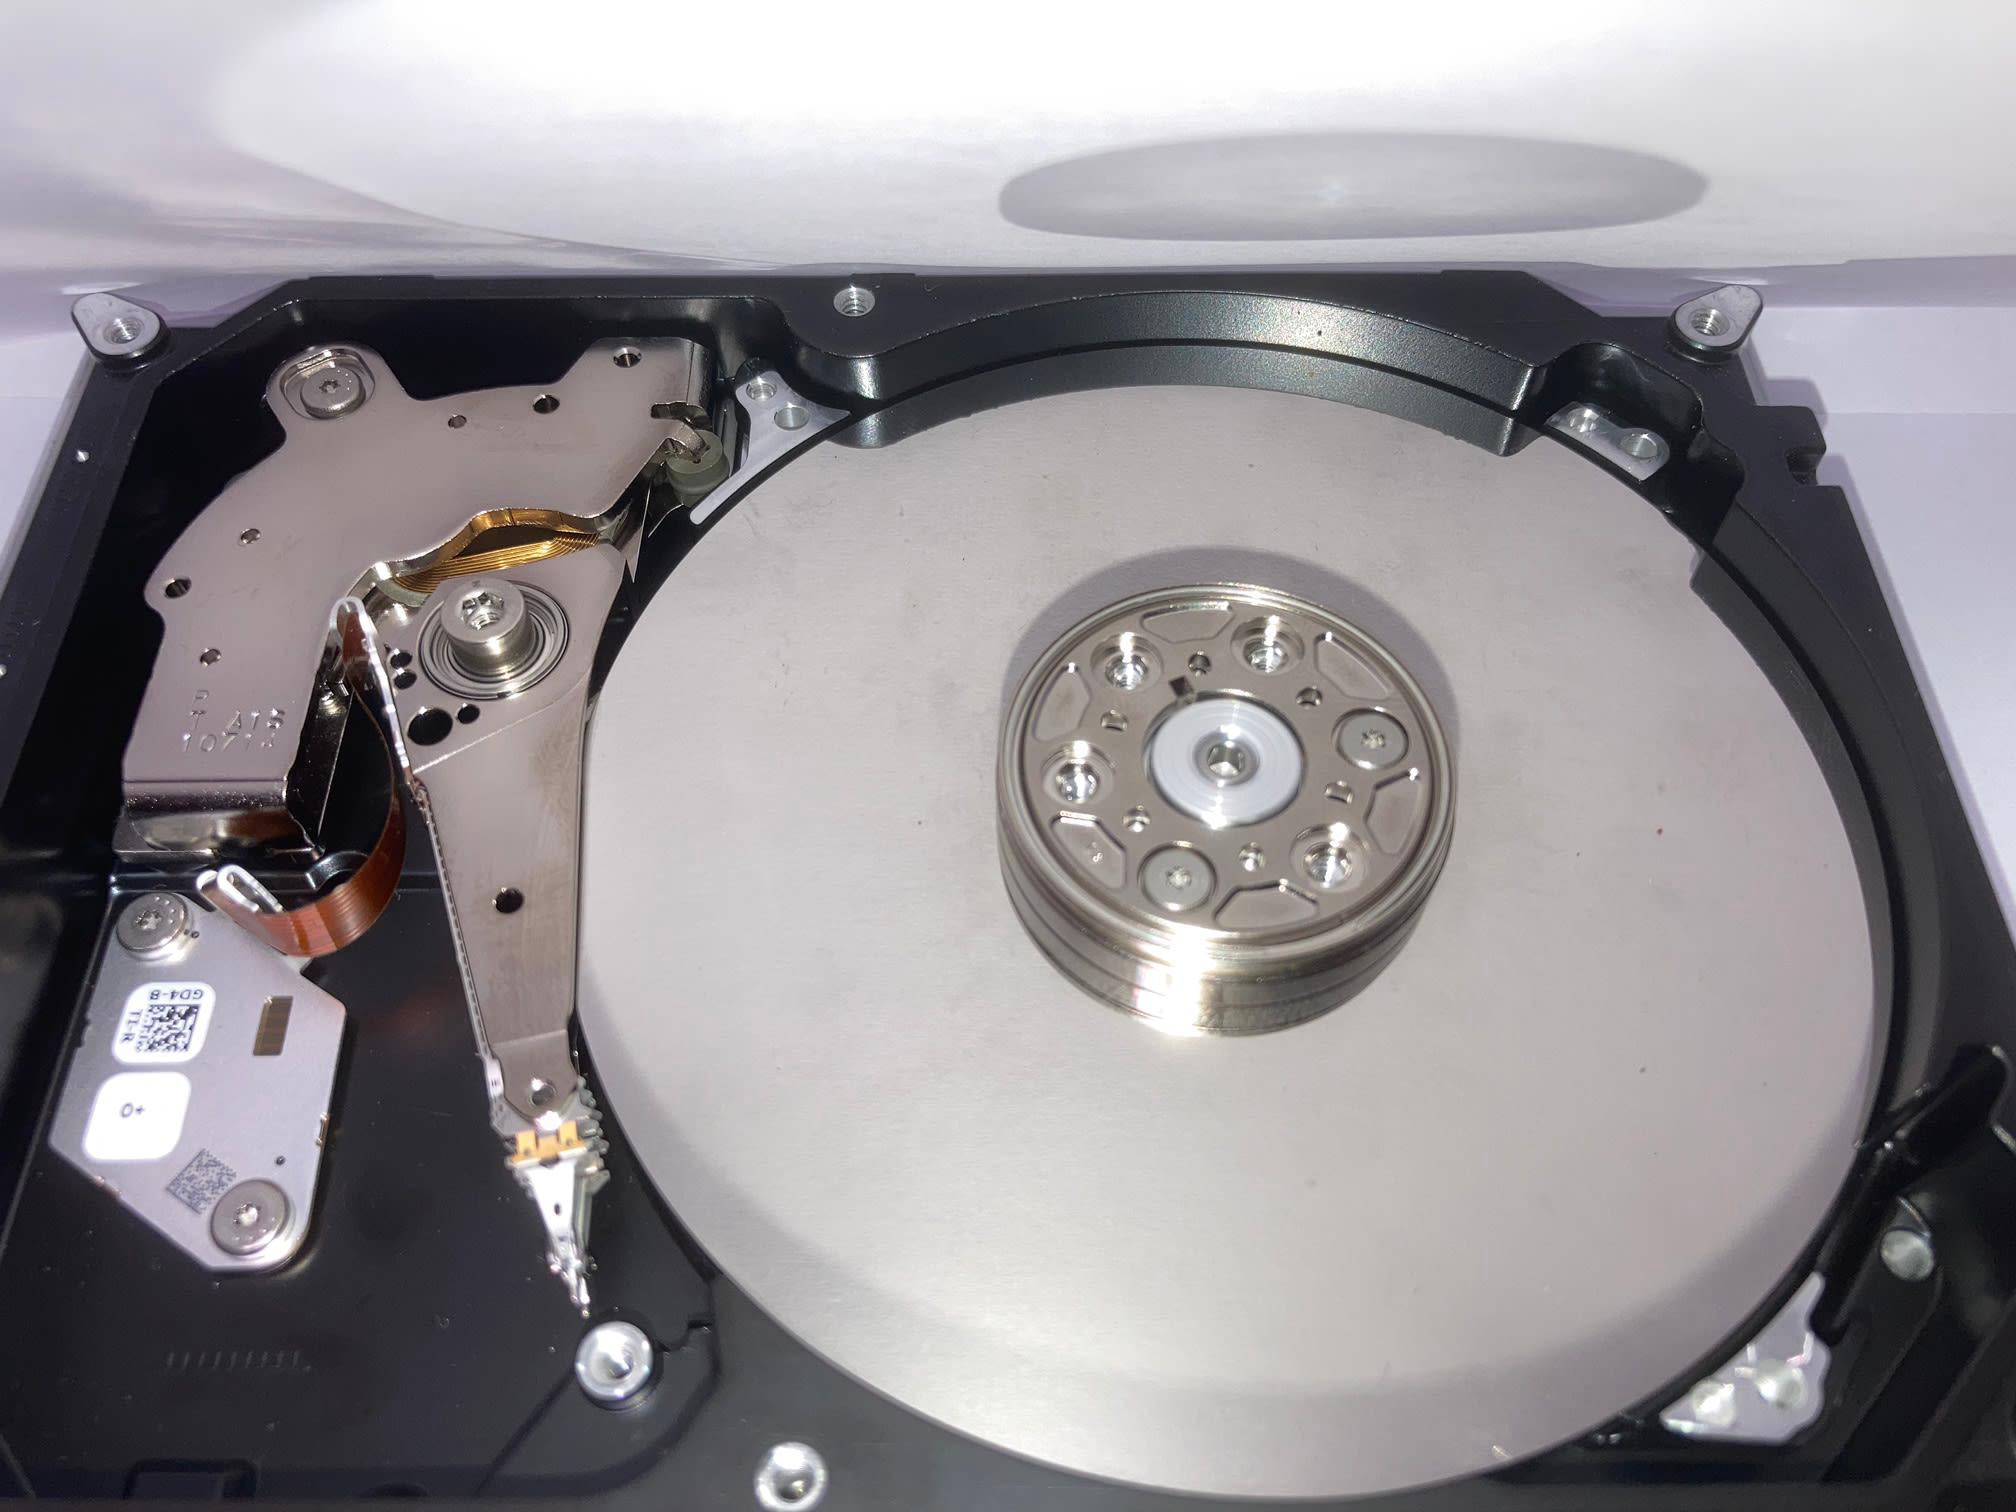 Images A J R Data Recovery